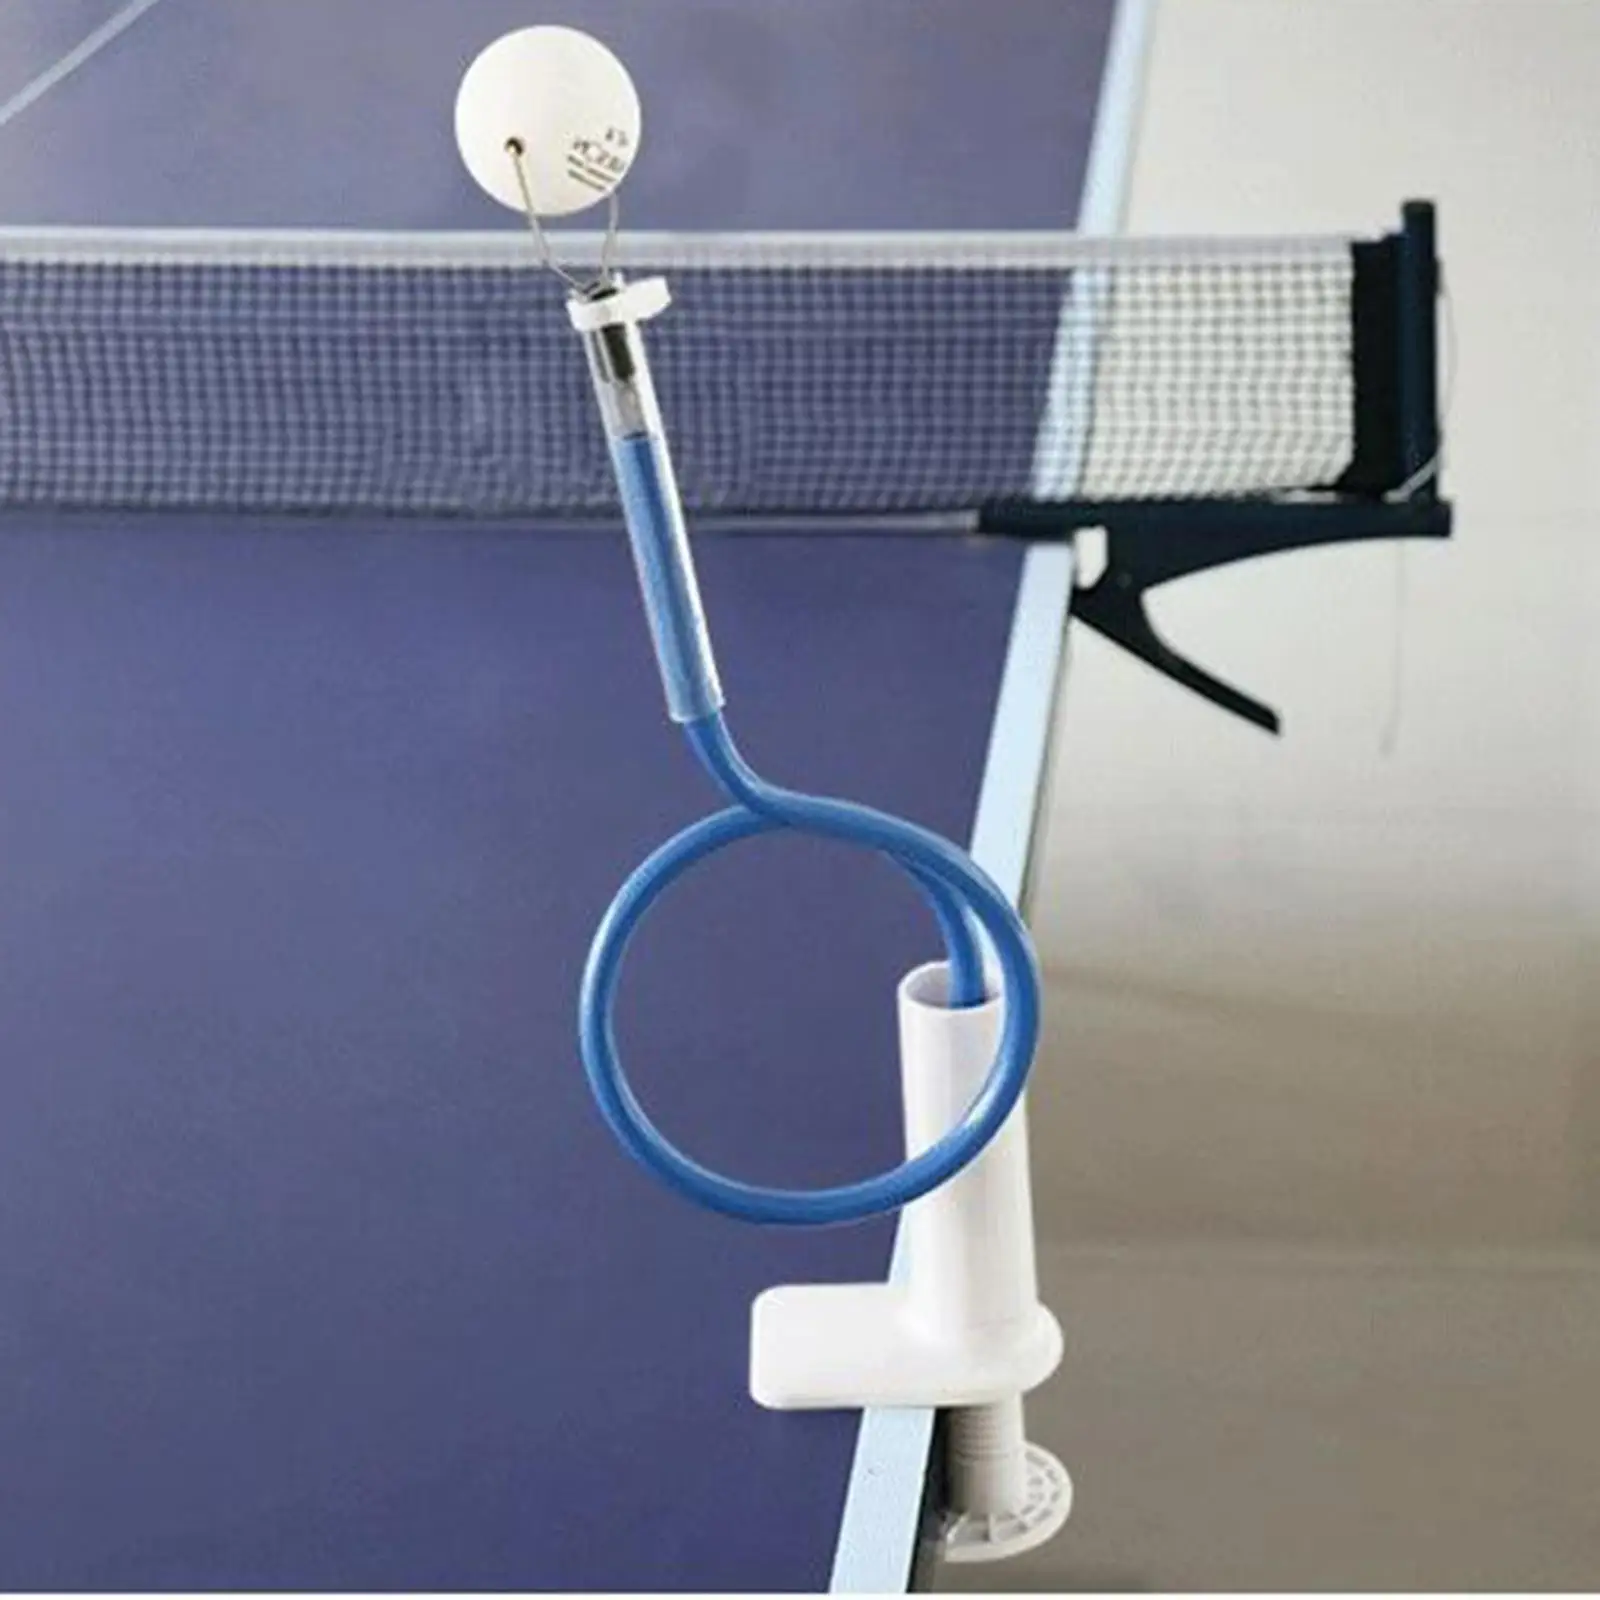 Clamp Fixed Machine Professional Table Tennis Training for Stroking Practice